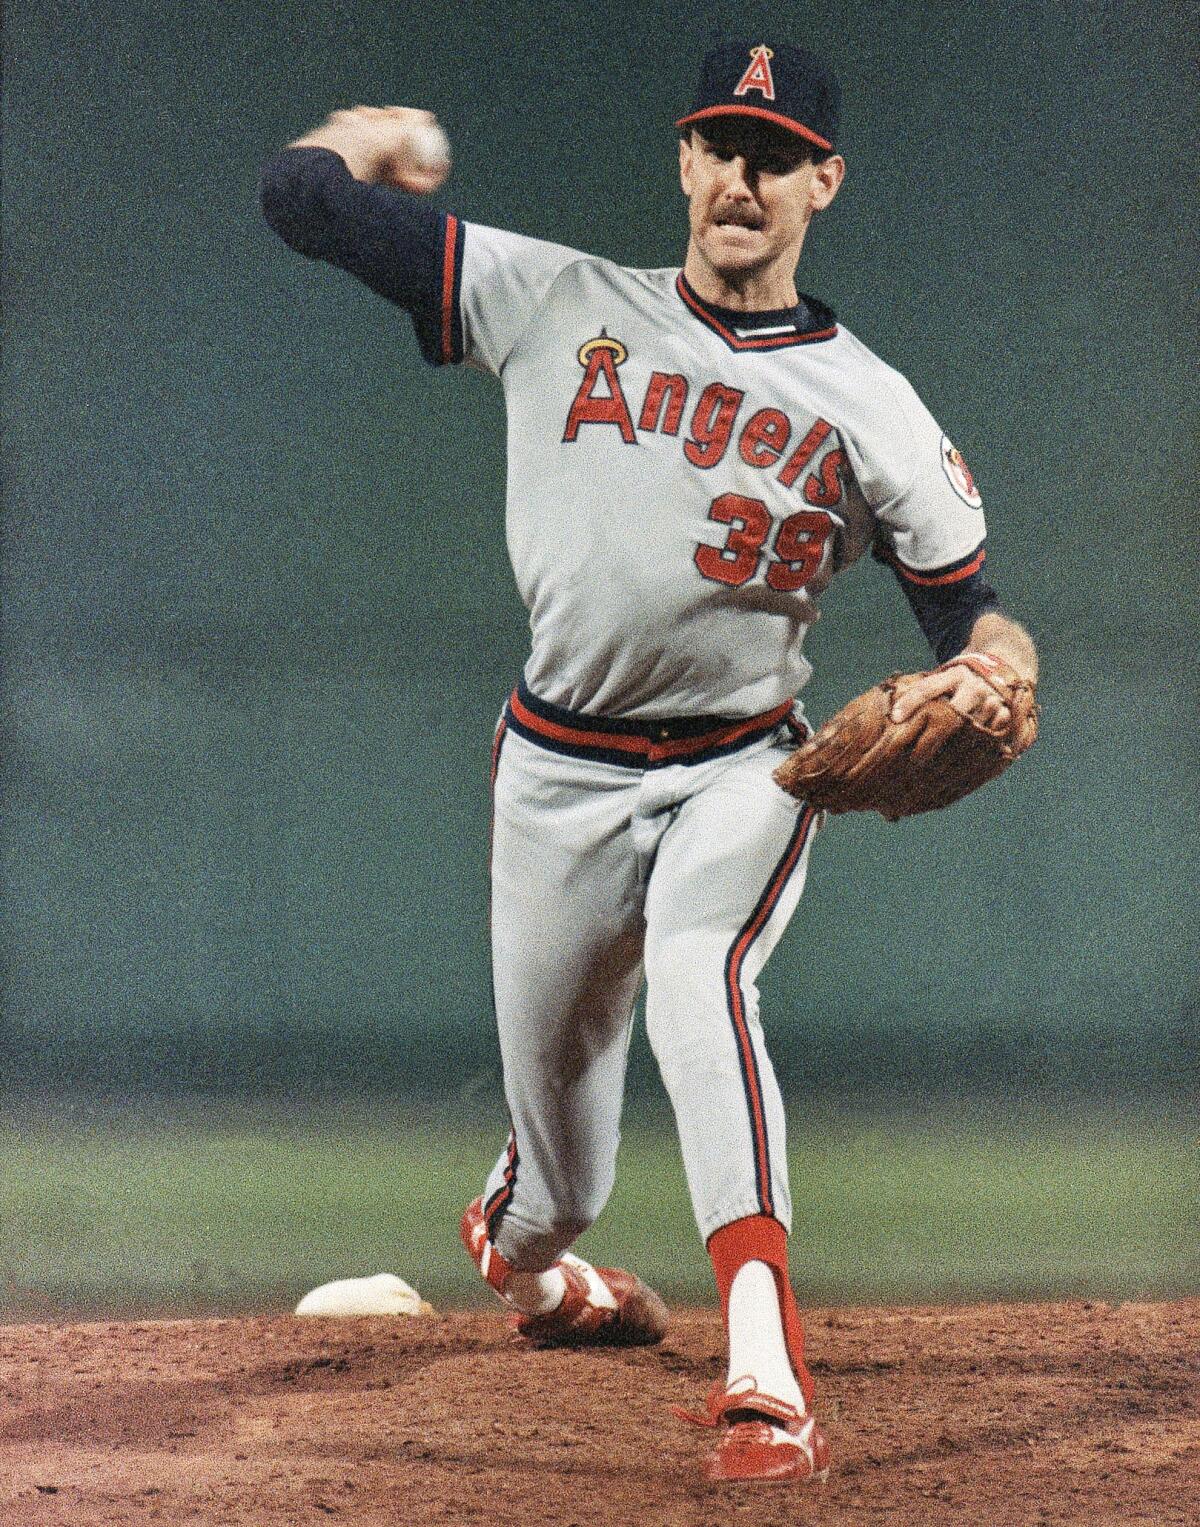 Angels' Mike Witt pitches against the Boston Red Sox in Game 1 of the 1986 ALCS.